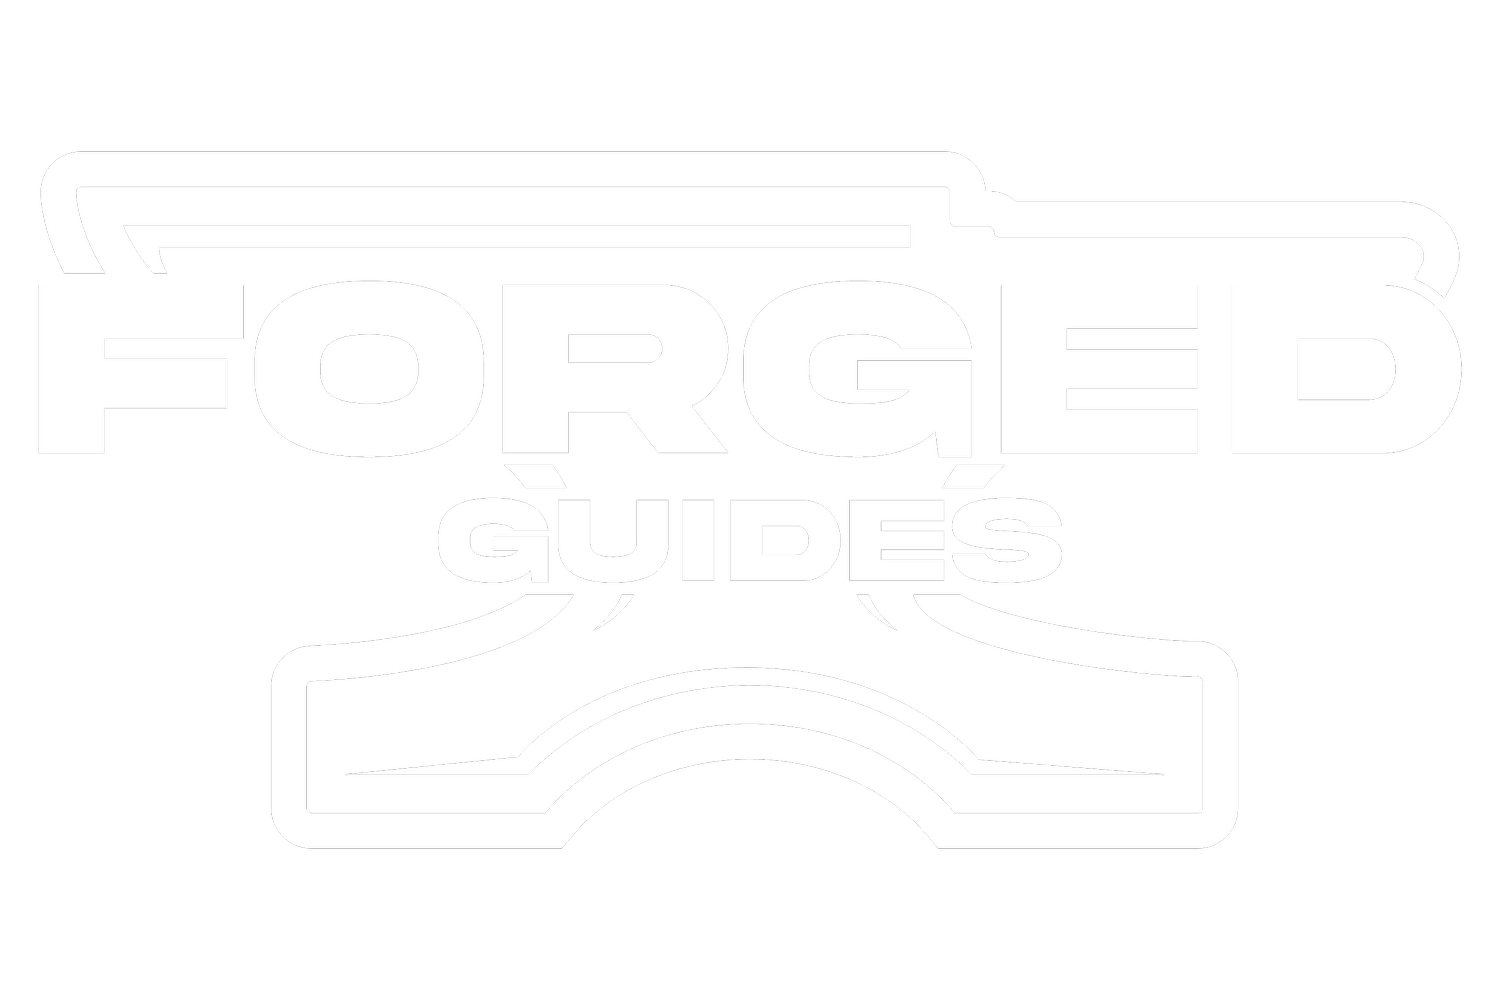 Forged Guides